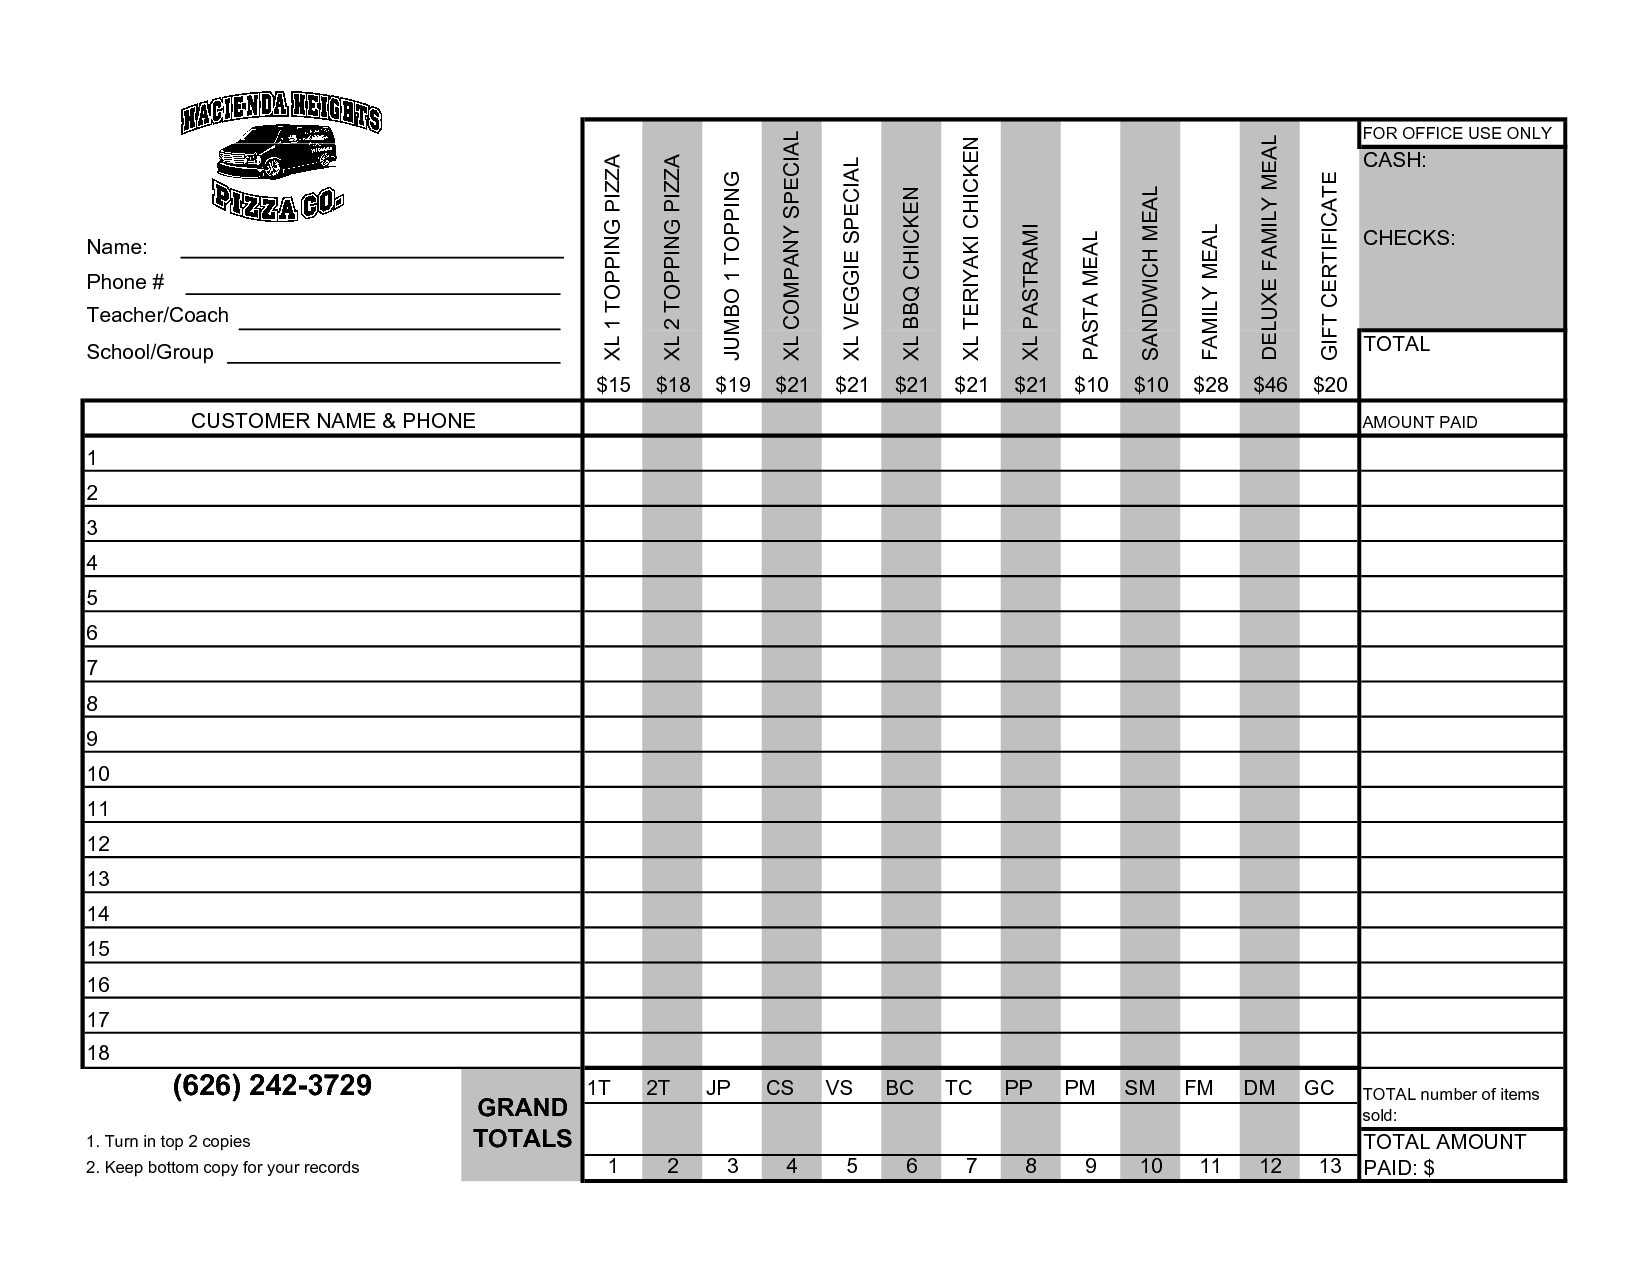 027 Template Ideas Fundraiser Form Free New Of Printable Within Blank Sponsor Form Template Free